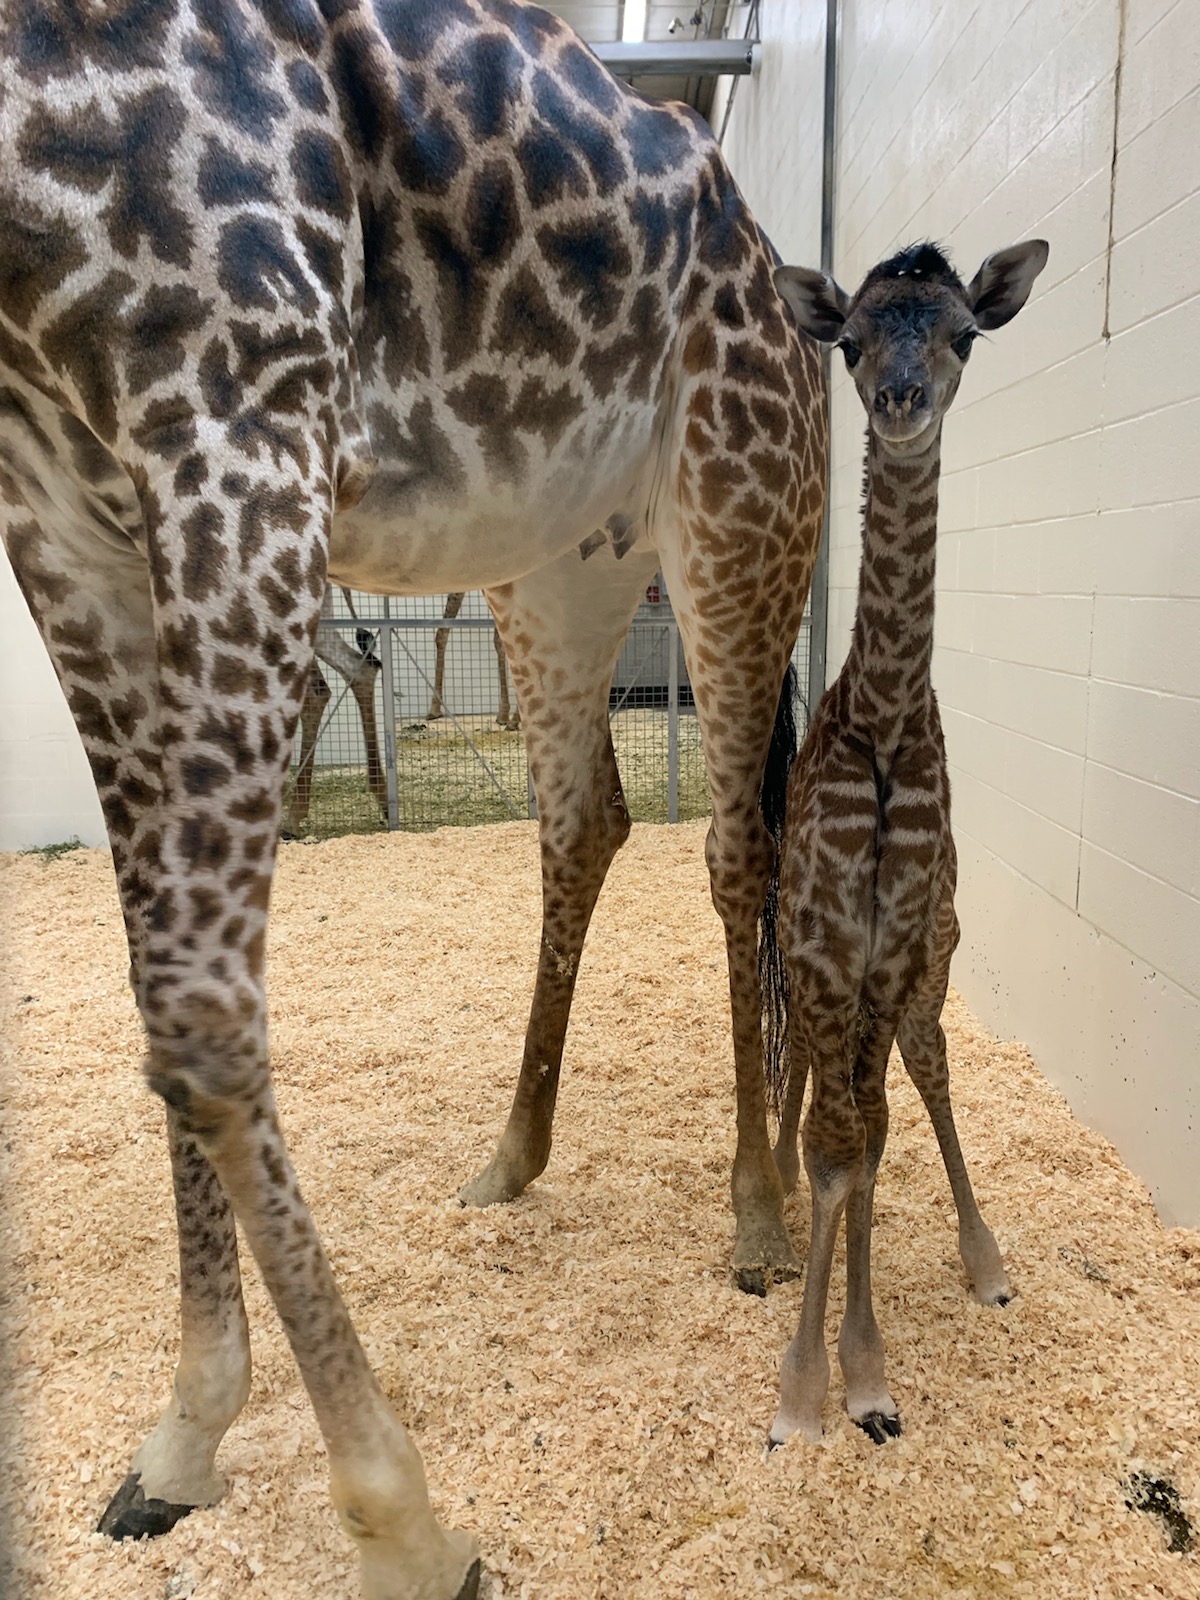 cincinnati giraffe zoo calf birth super gives fourth mum tessa kimba standing parents welcome its meaning babies give zoos